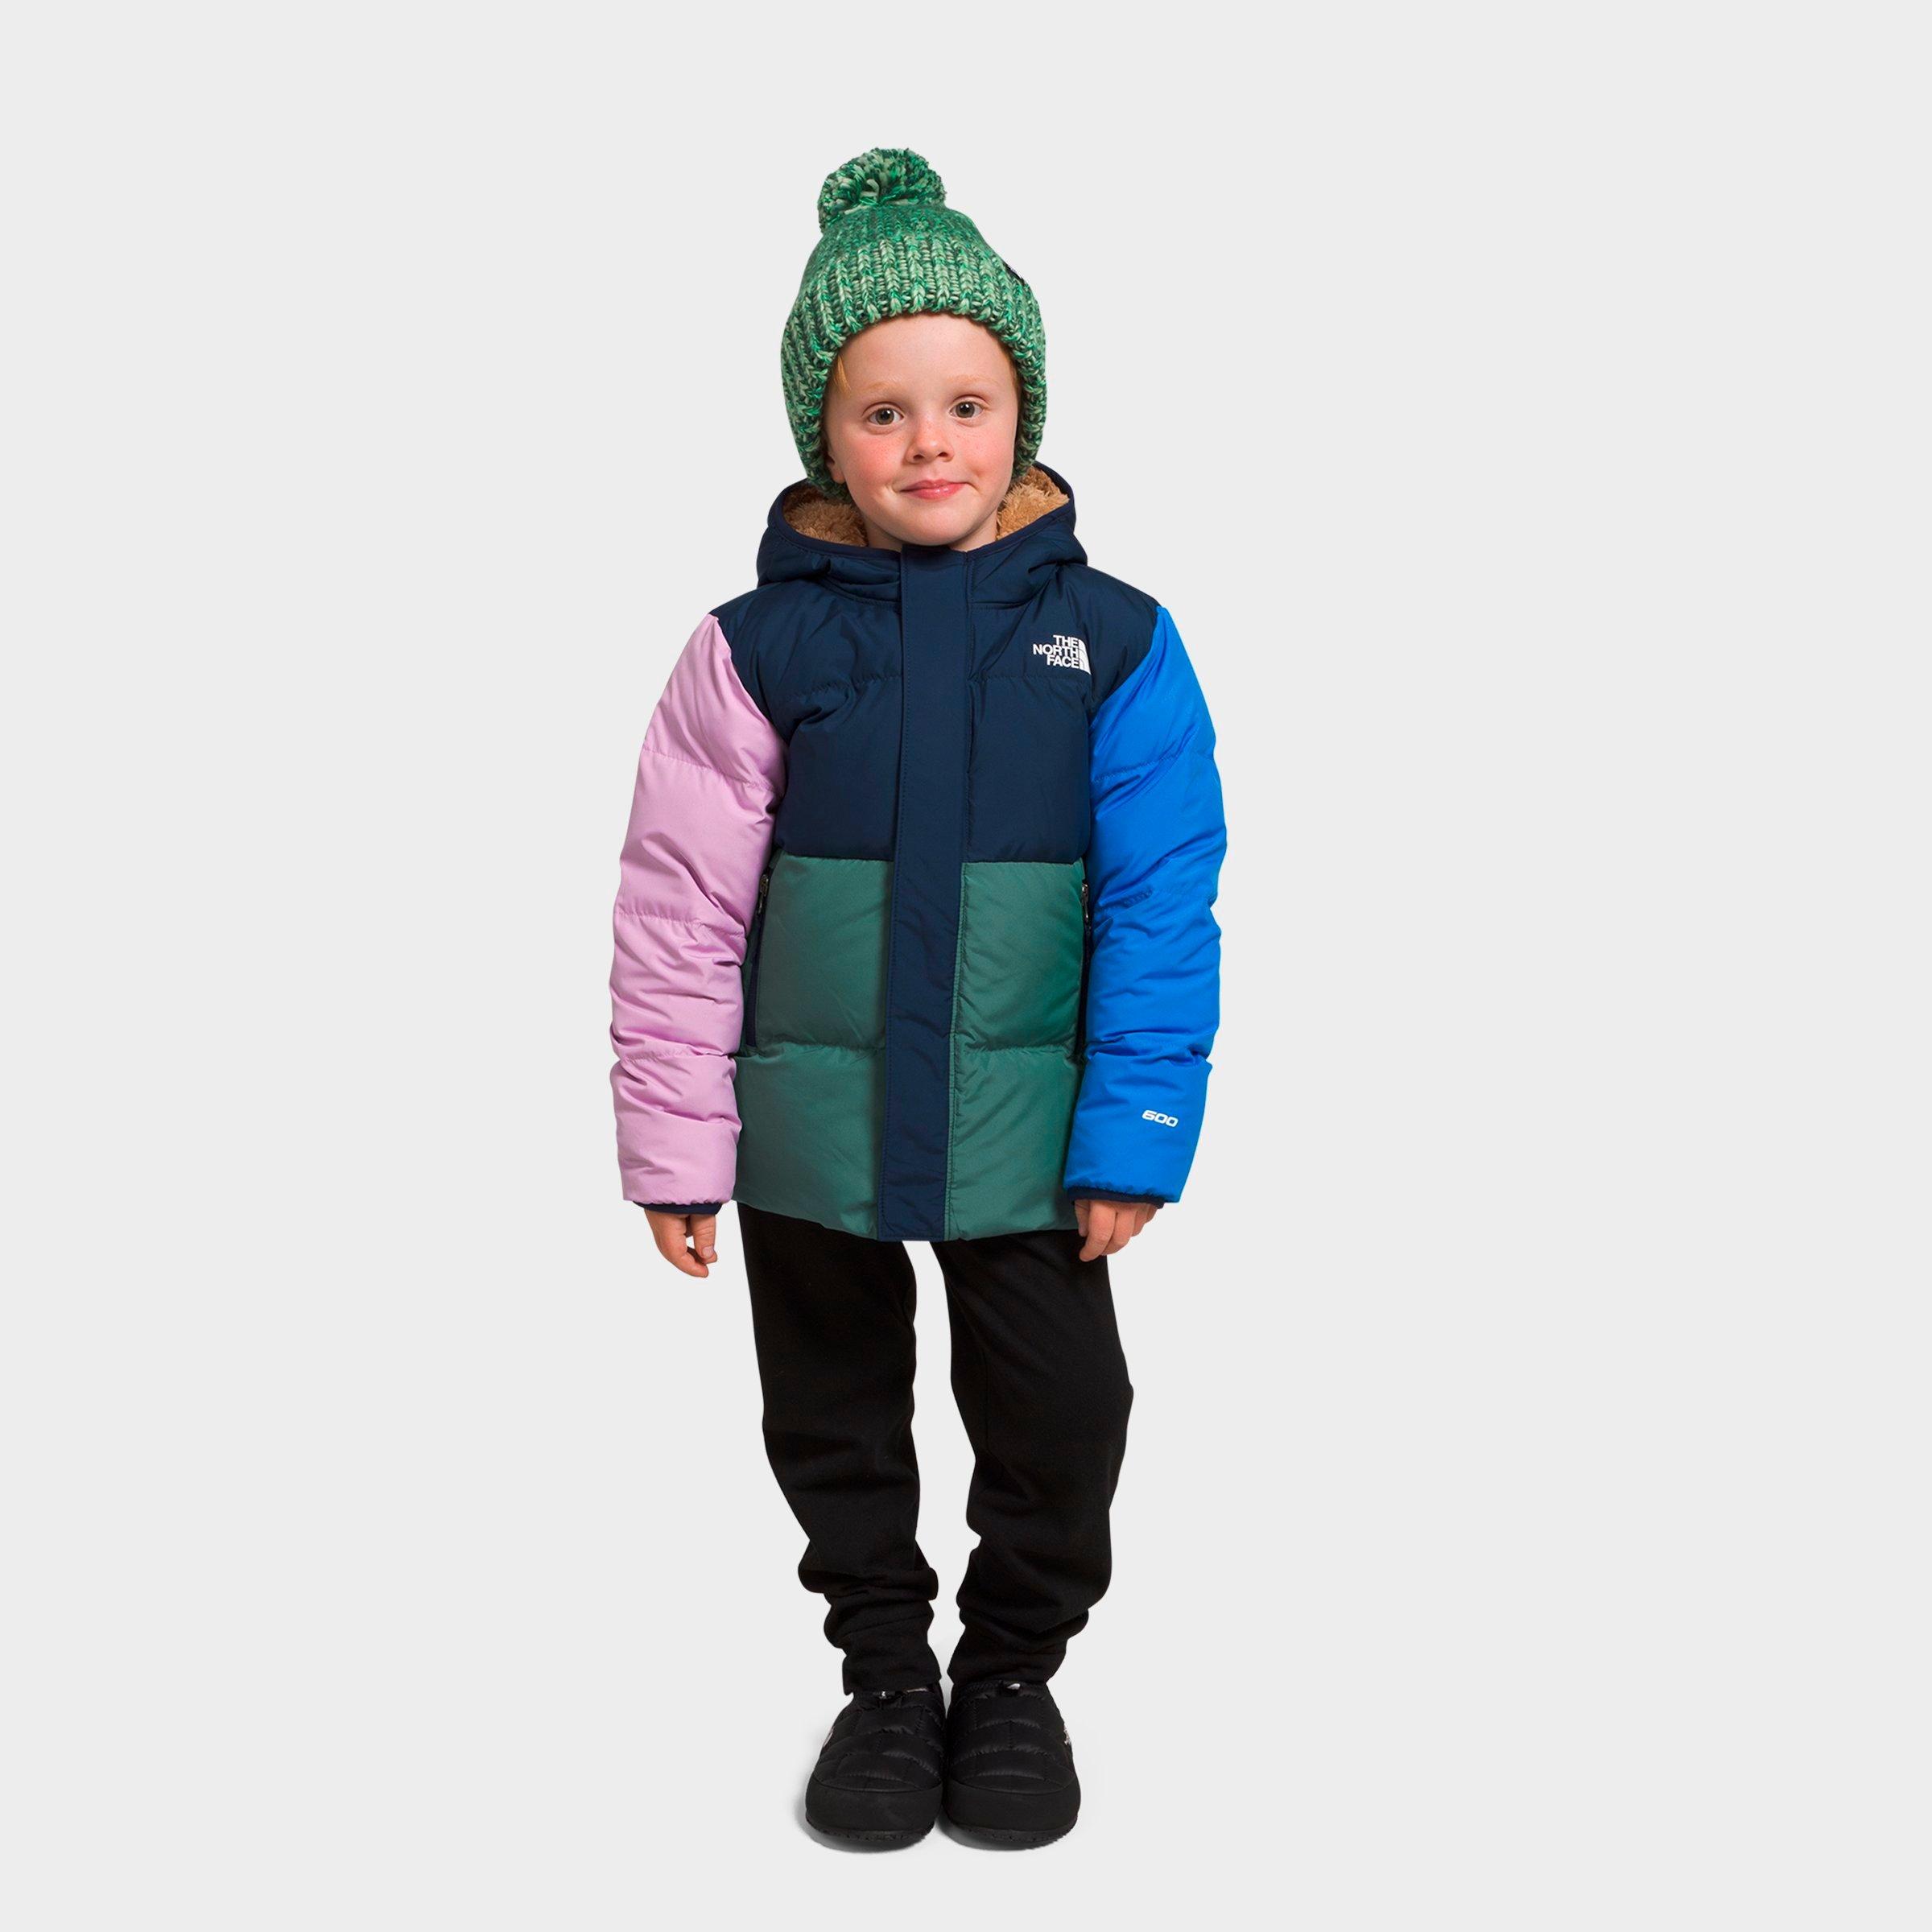 THE NORTH FACE THE NORTH FACE INC LITTLE KIDS' NORTH DOWN HOODED JACKET SIZE 7 NYLON/POLYESTER/FLEECE